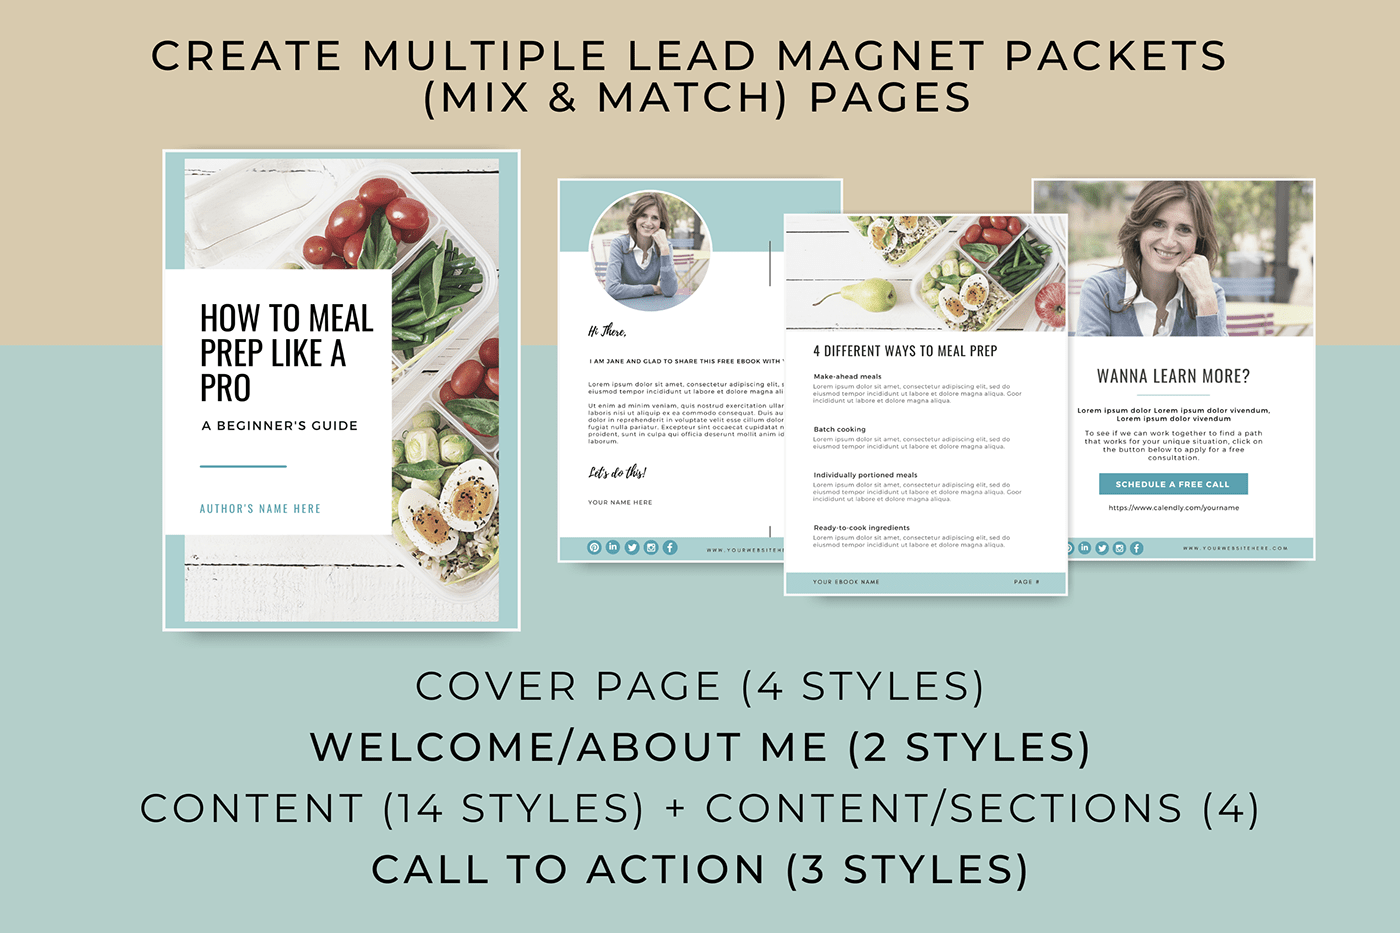 blogger lead magnet call to action coach lead magnet ebook template freebie template how to guide Lead Magnet Canva lead magnet wellness leadmagnet ebook opt-in template